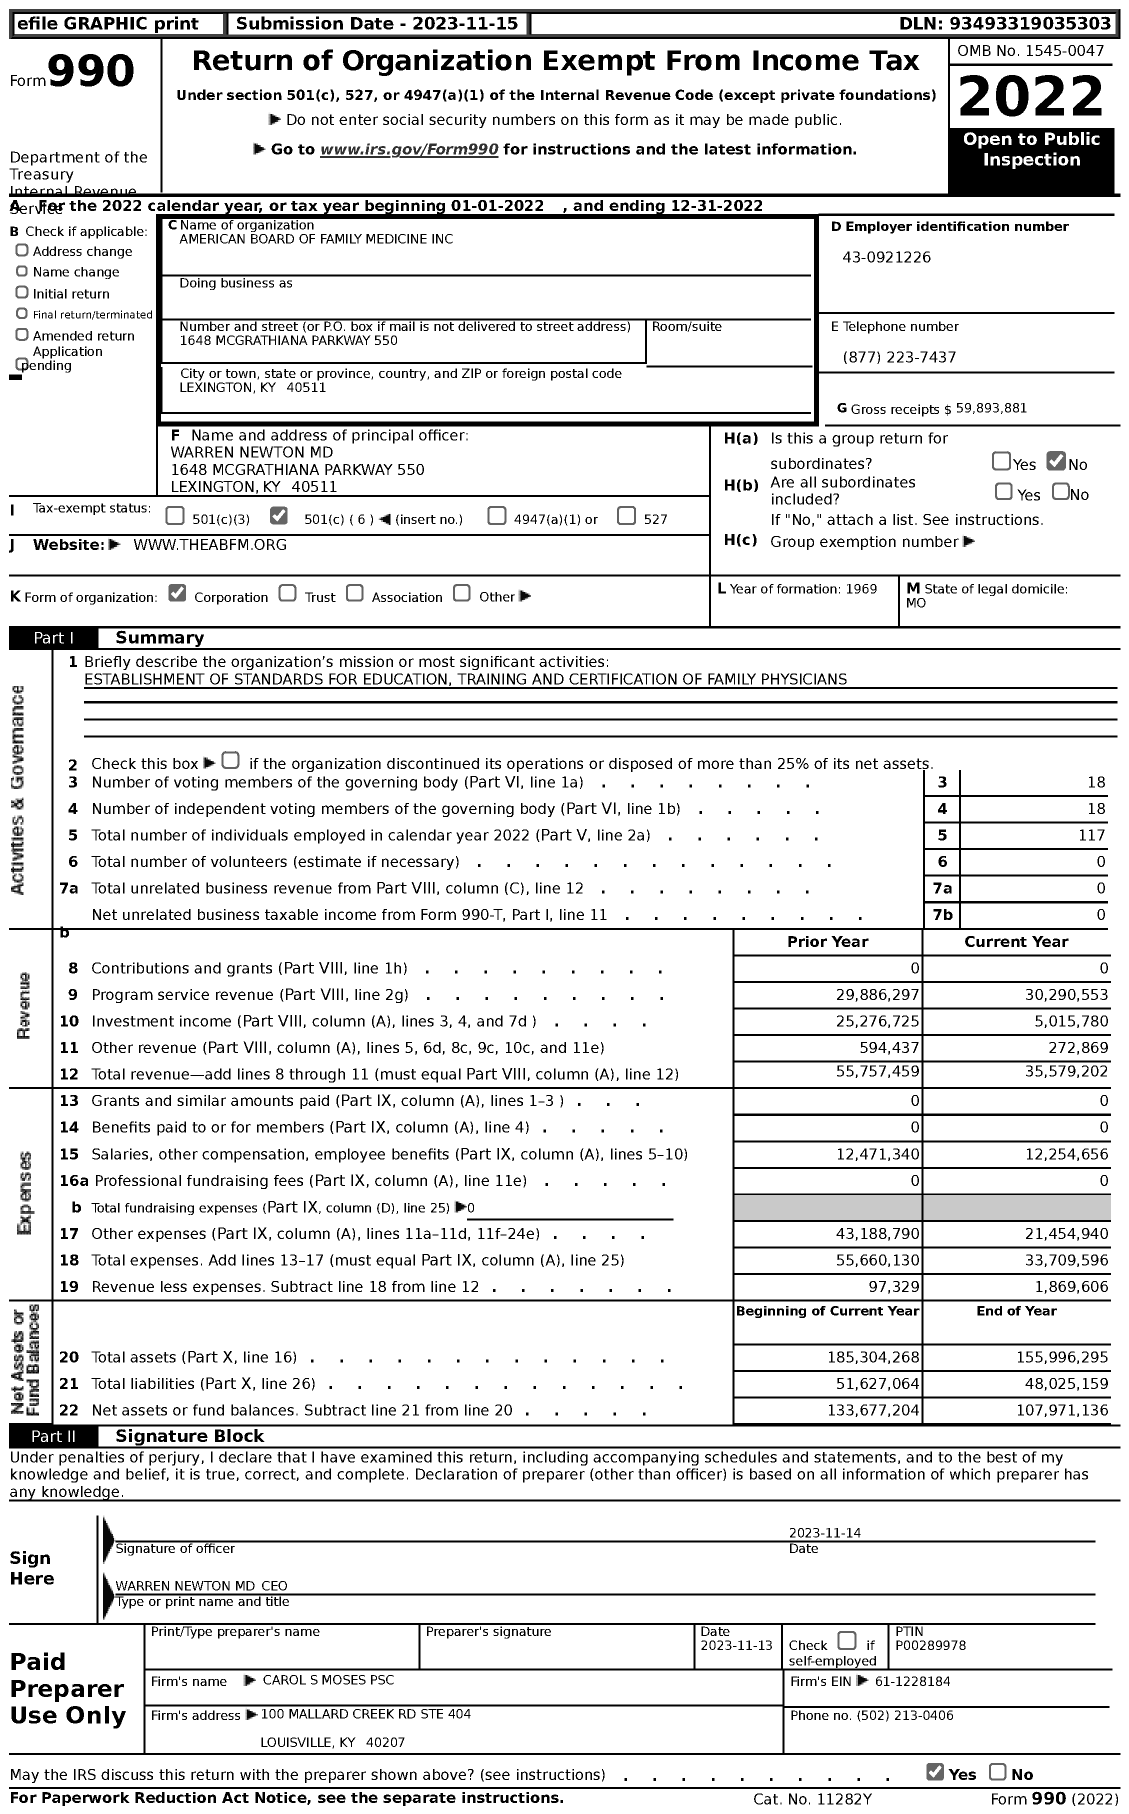 Image of first page of 2022 Form 990 for American Board of Family Medicine (ABFM)